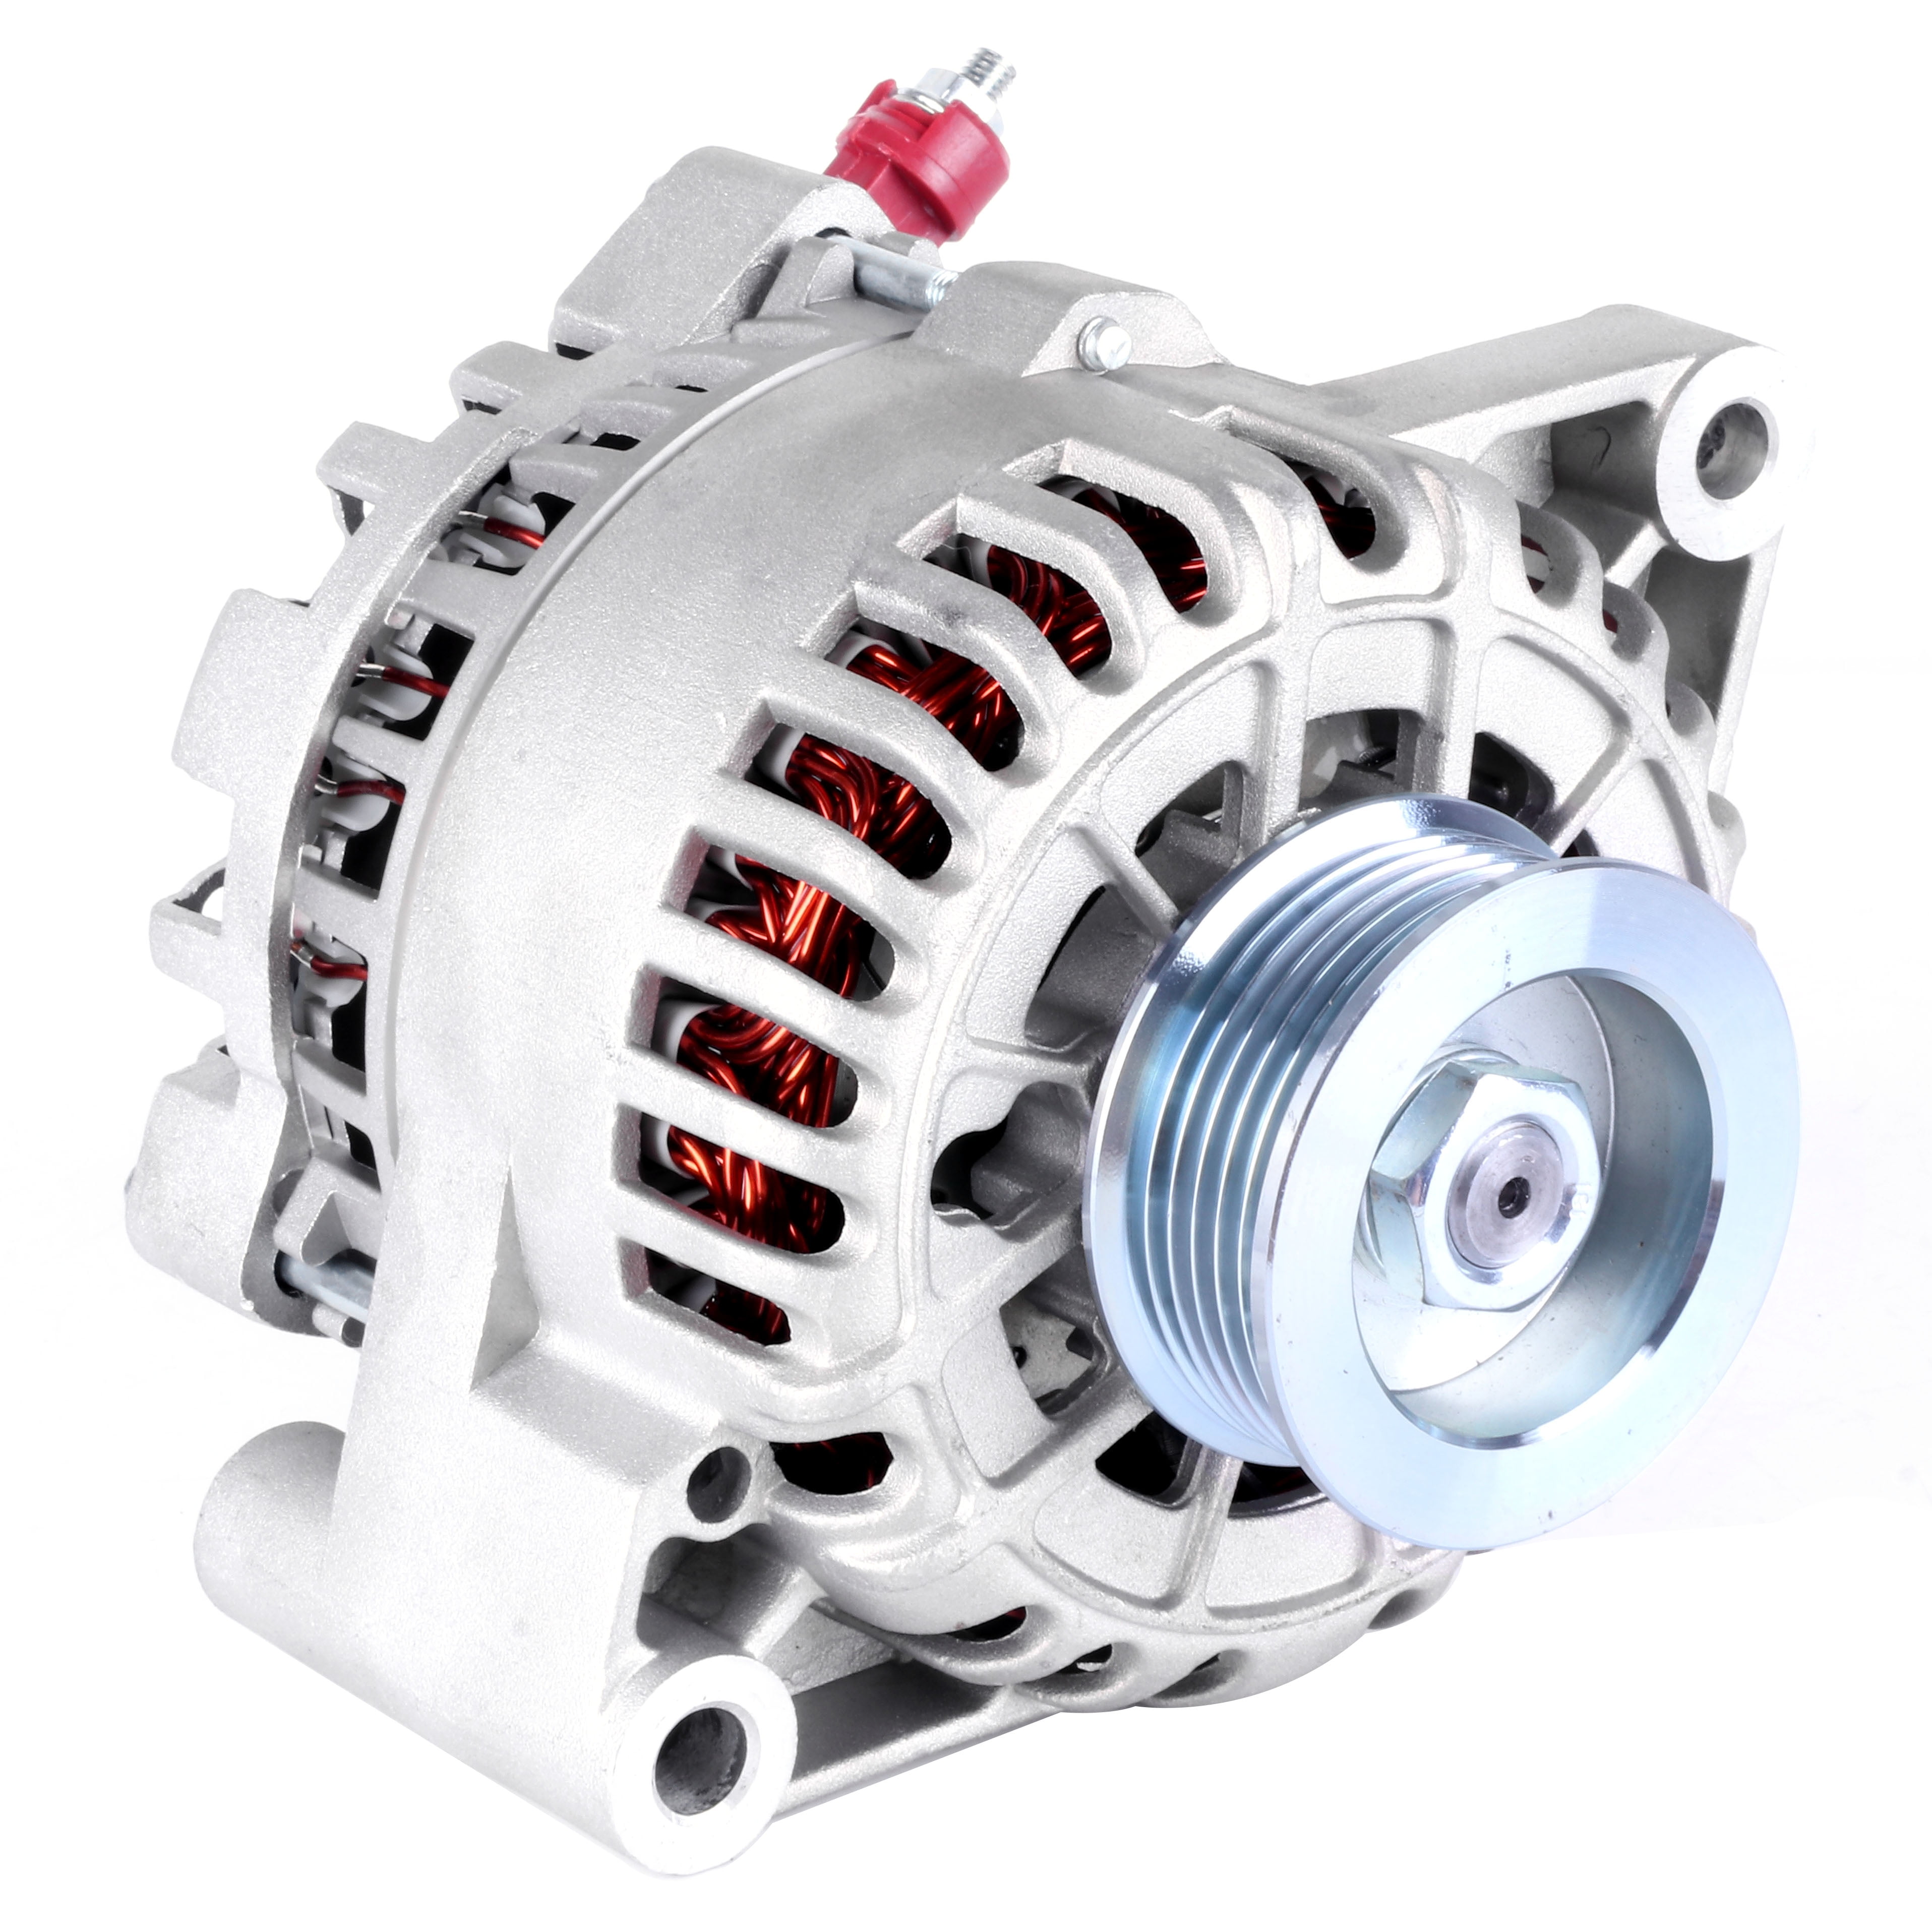 SCITOO Alternators 8266N 105A fit Ford Mustang 3.8L 2001 2002 2003 2004 S6 